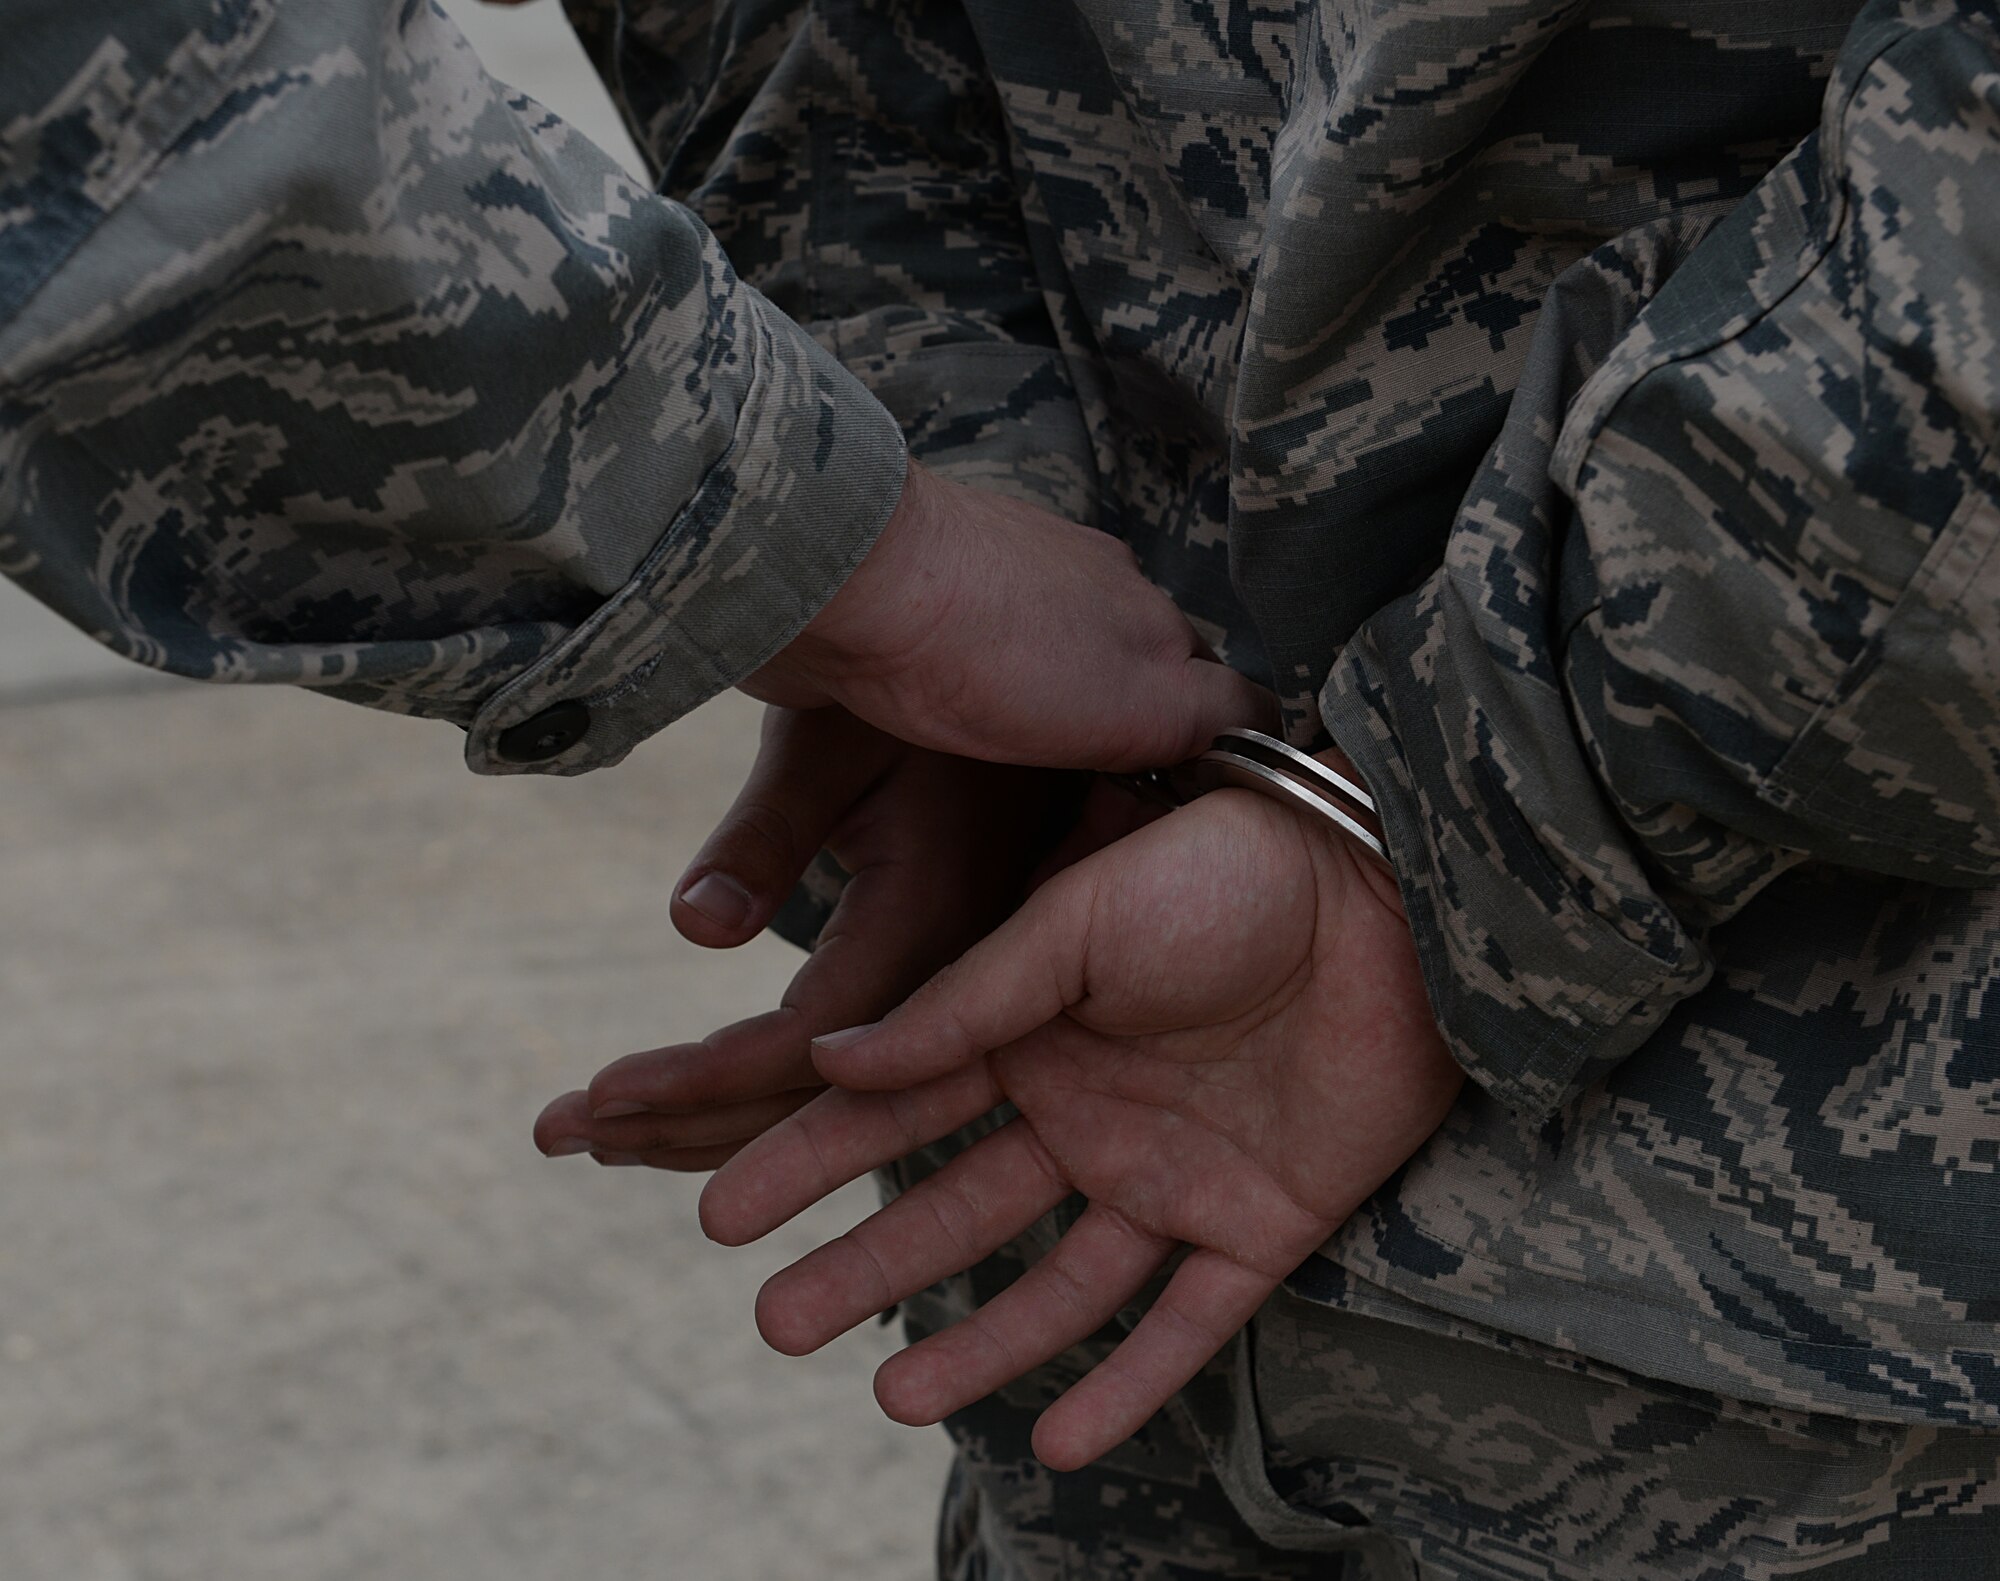 Airman 1st Class Britton Smith, 81st Security Forces internal security response team leader, simulates apprehending an Airman on the flightline March 12, 2015, Keesler Air Force Base, Miss. 81st SFS Airmen perform multiple roles to keep members of Keesler safe, ranging from identification checks at base entrances to searching for explosives and narcotics with military working dogs. (U.S. Air Force photo by Senior Airman Holly Mansfield)